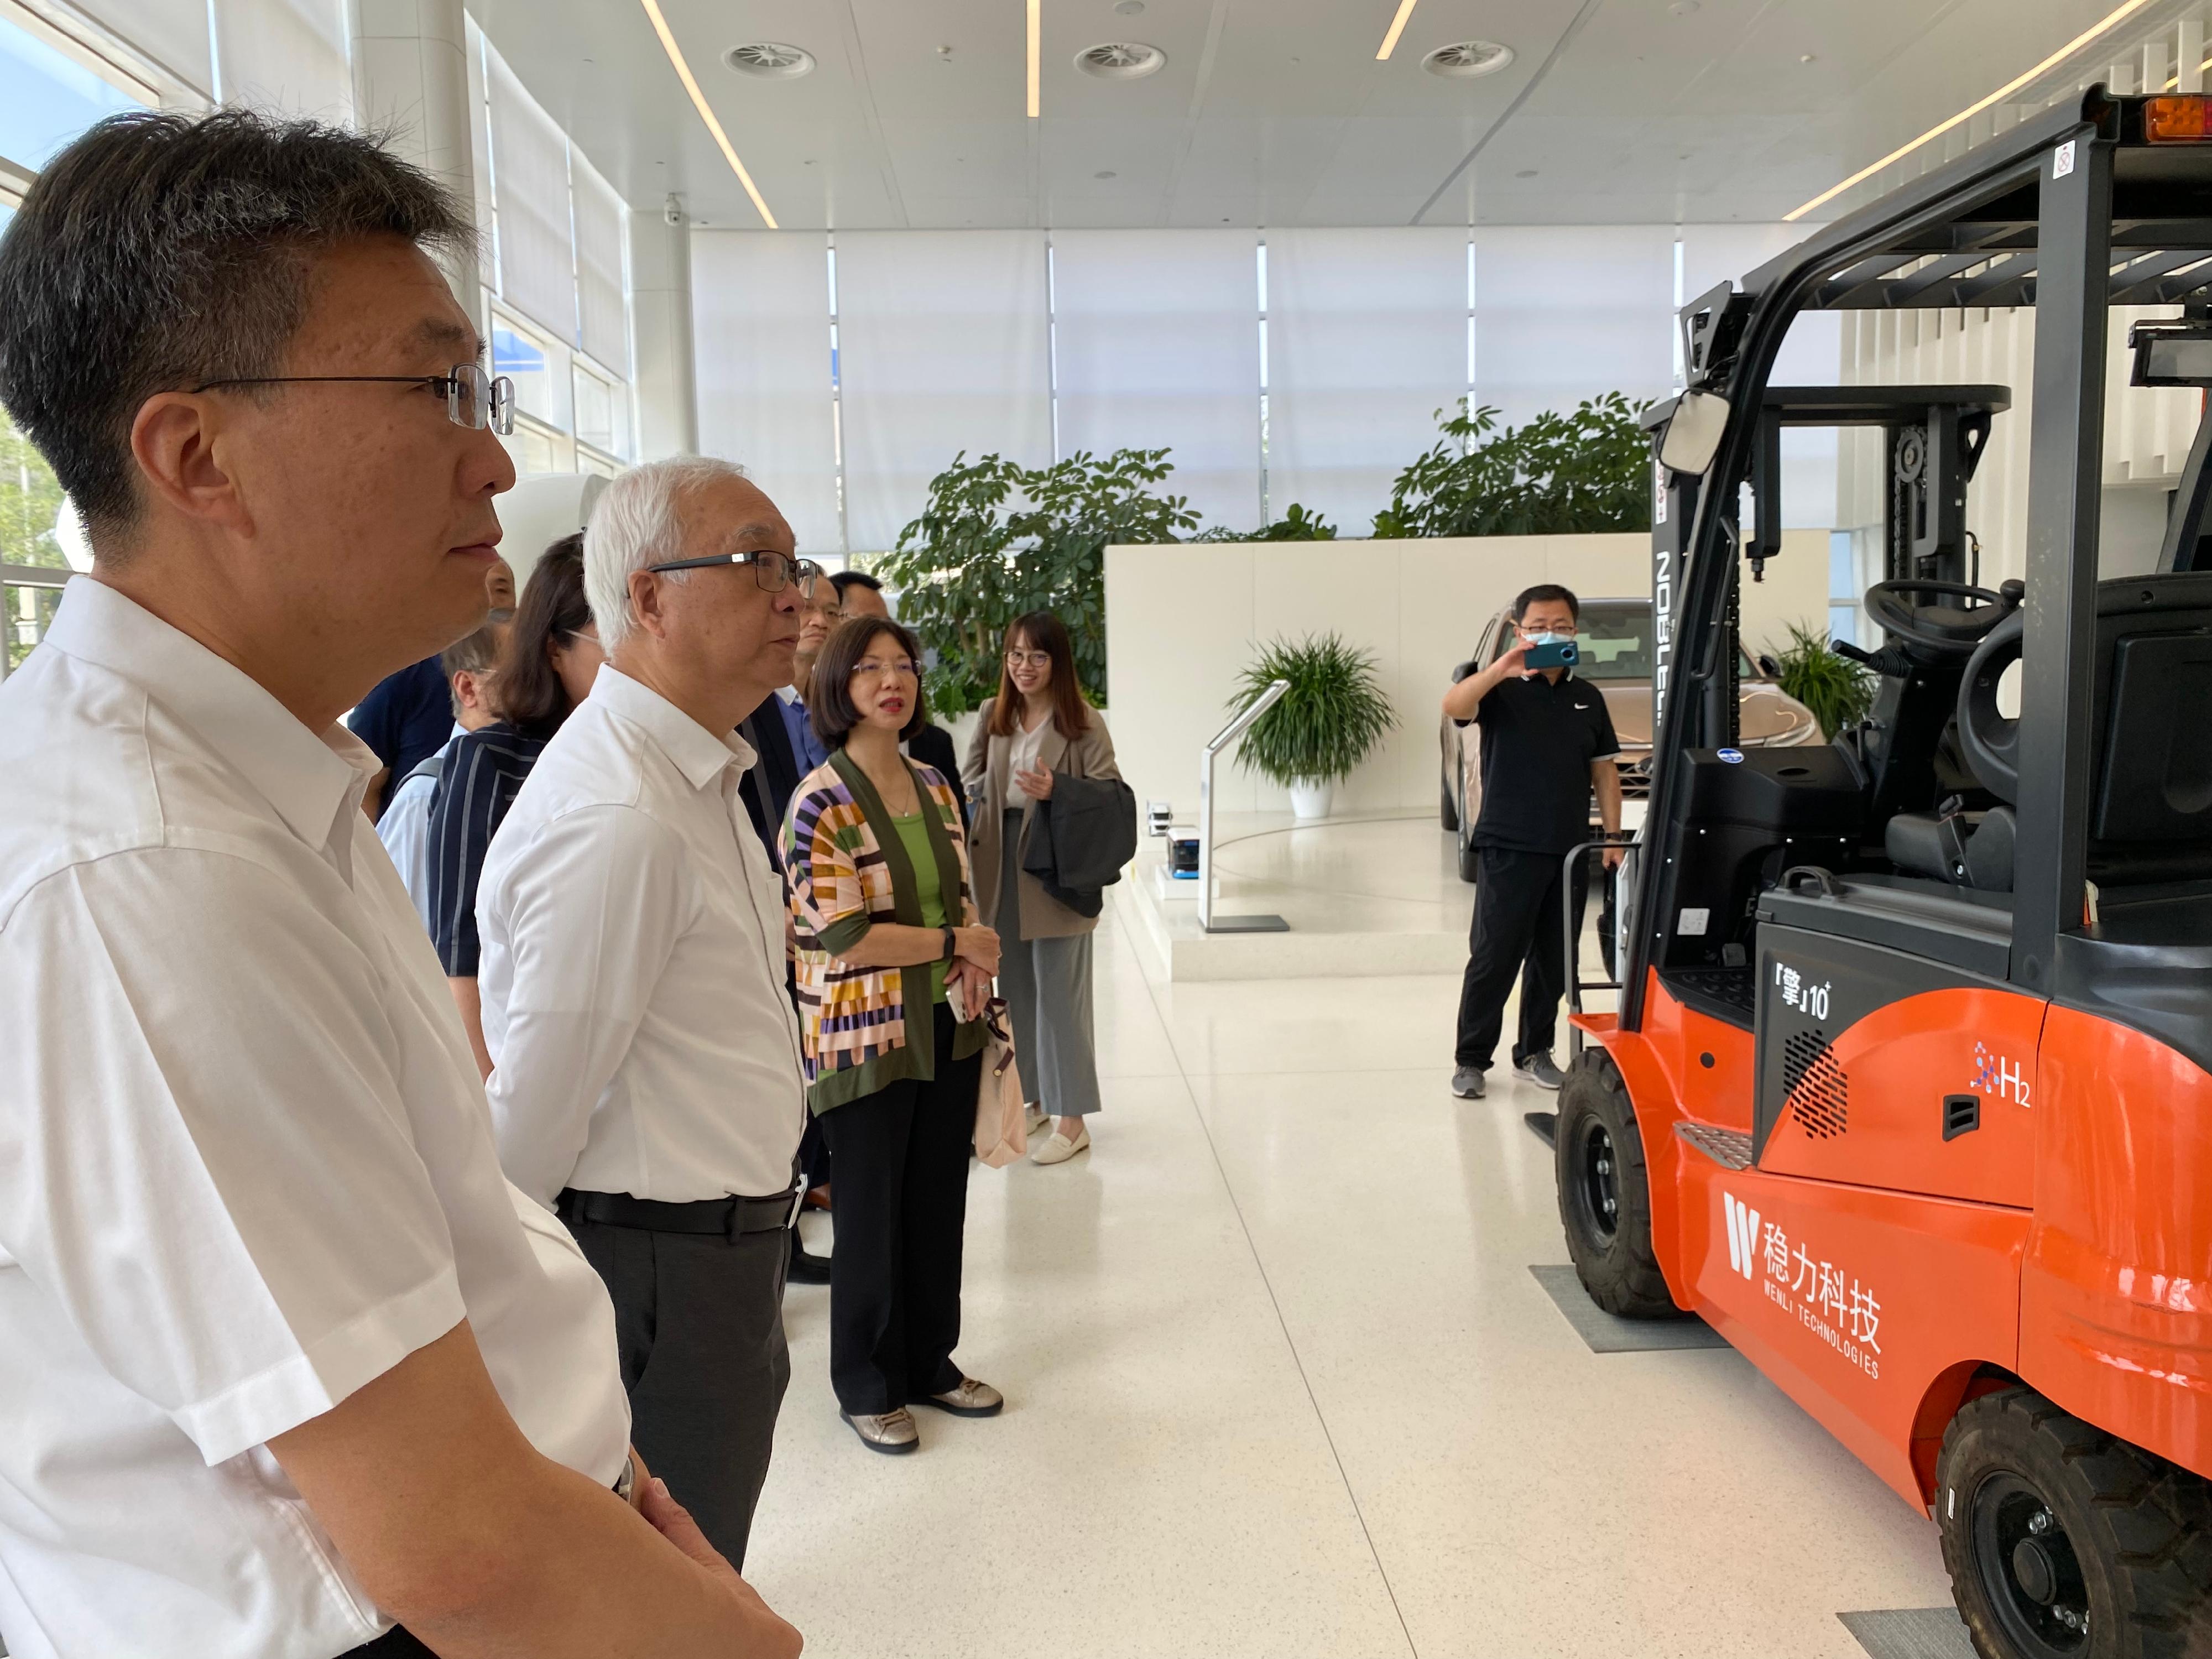 The Secretary for Environment and Ecology, Mr Tse Chin-wan, visited the Daxing International Hydrogen Energy Demonstration Zone today (June 16). Photo shows Mr Tse (second left) and the Permanent Secretary for Environment and Ecology (Environment), Miss Janice Tse (third left), viewing different types of hydrogen fuel cell electric vehicles displayed in the Demonstration Zone.